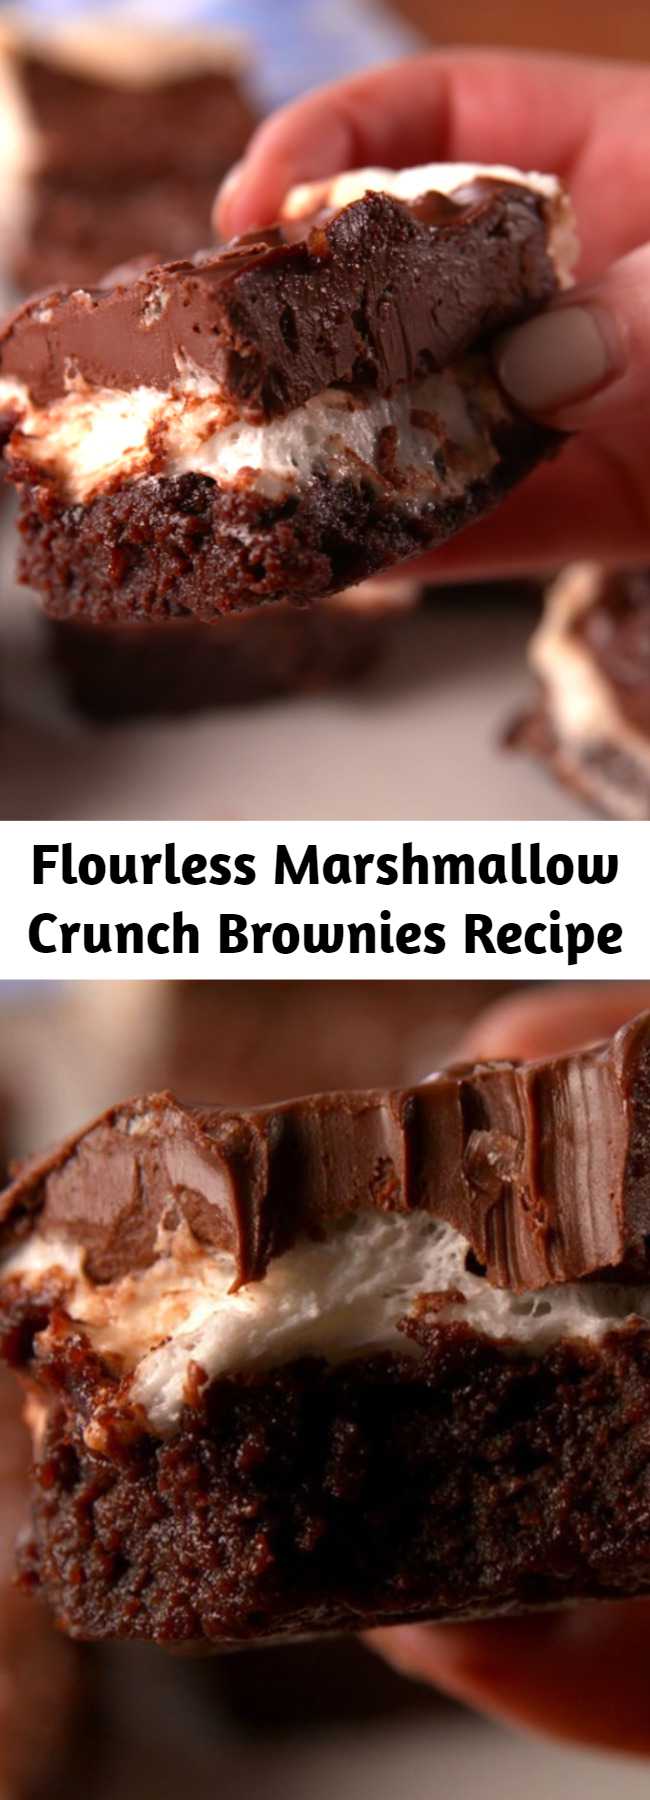 Flourless Marshmallow Crunch Brownies Recipe - Fudgy, chewy, and completely gluten-free. Super fudgy brownies topped with a layer of marshmallows and a chocolate, peanut butter and Rice Krispies mixture.